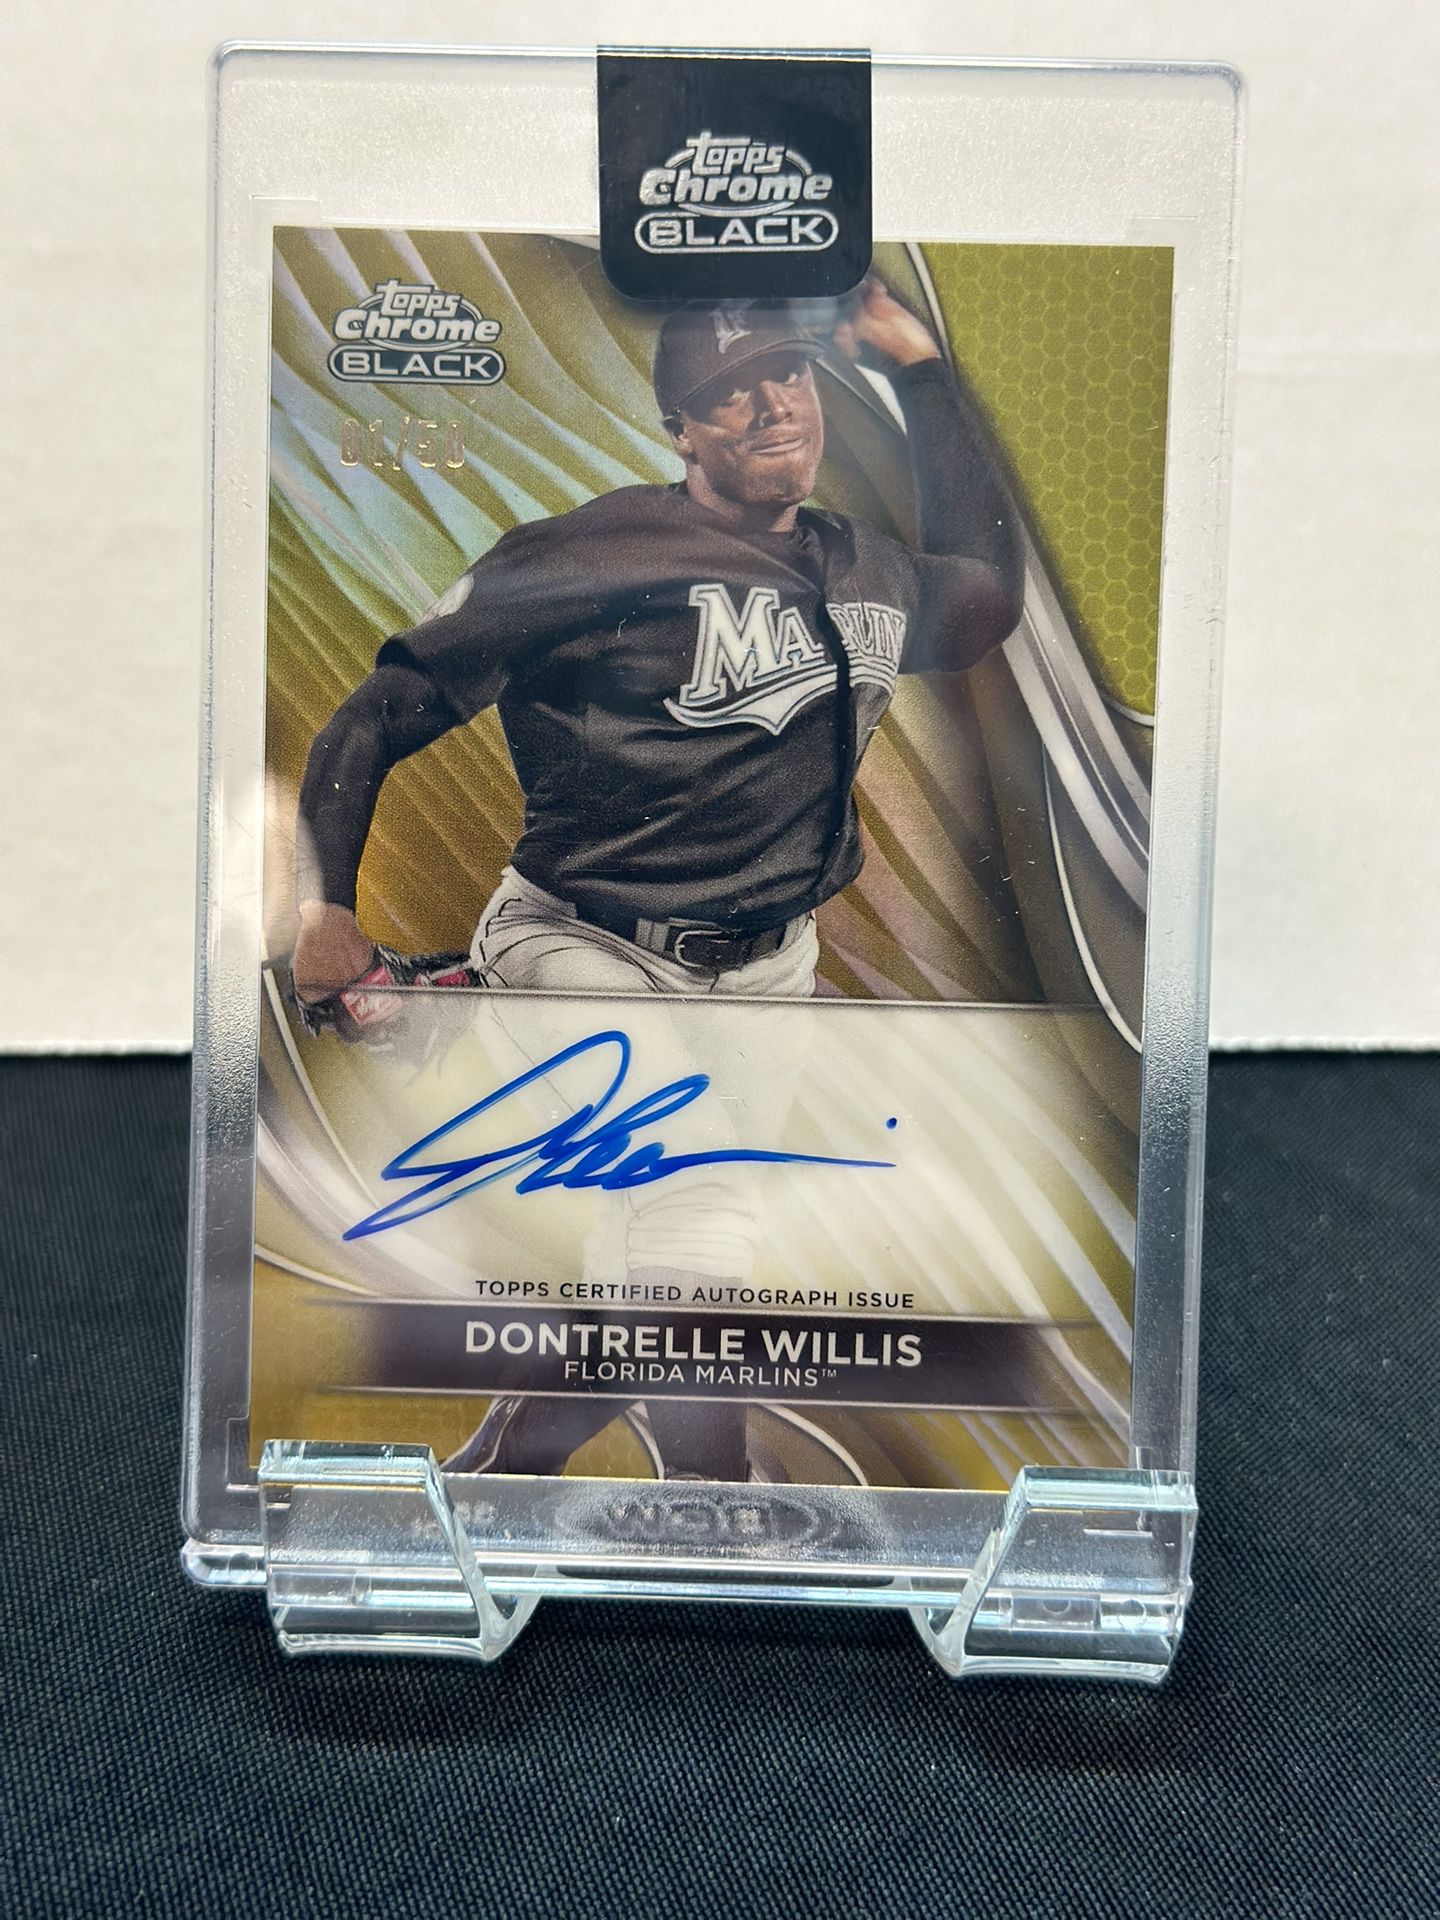 2024 Topps CHROME BLACK DONTRELLE WILLIS GOLD REFRACTOR AUTO #01/50 MARLINS